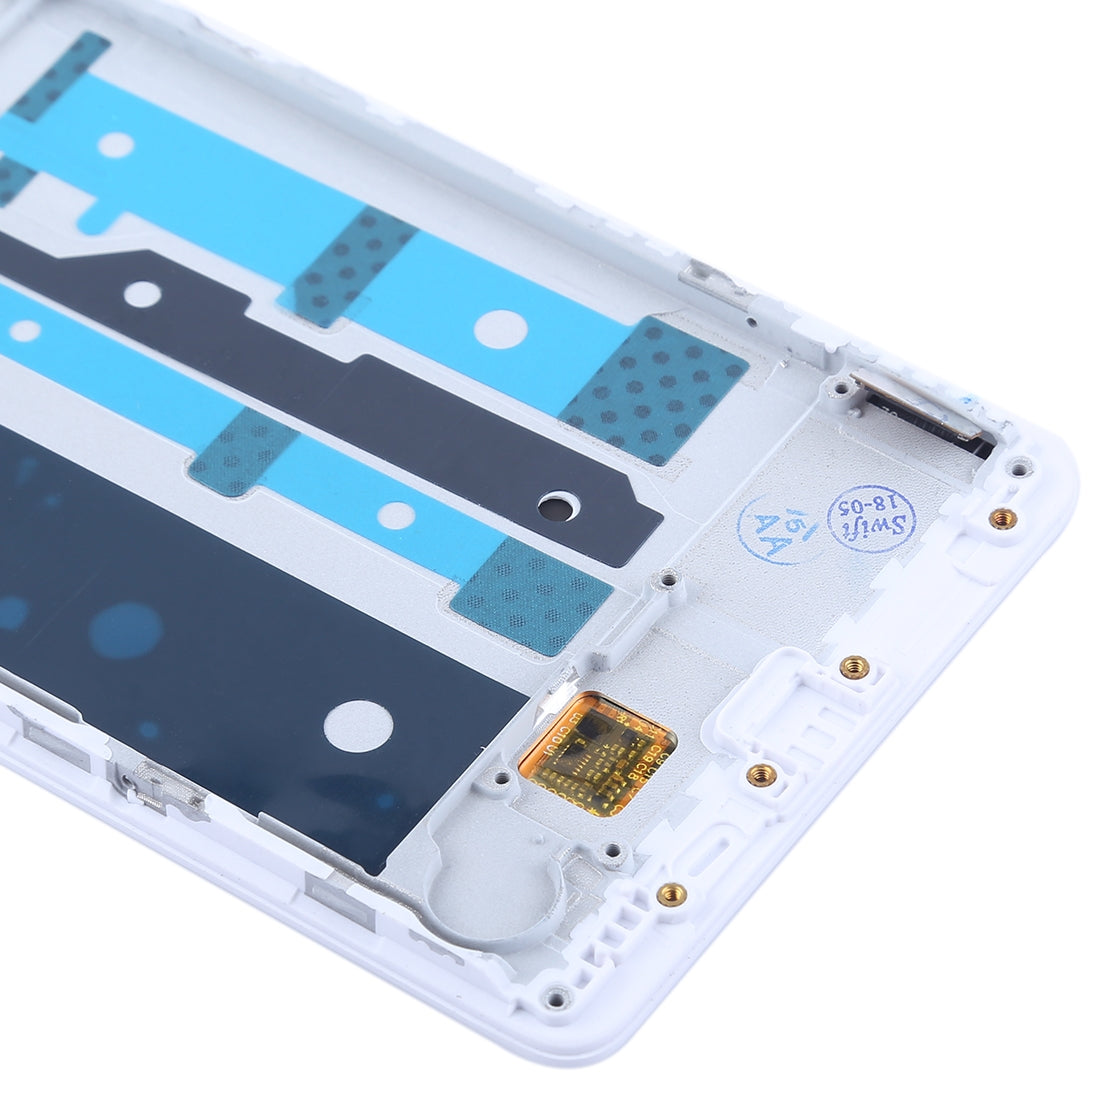 Ecran Complet LCD + Tactile + Châssis (Version TFT) Oppo R7s Blanc